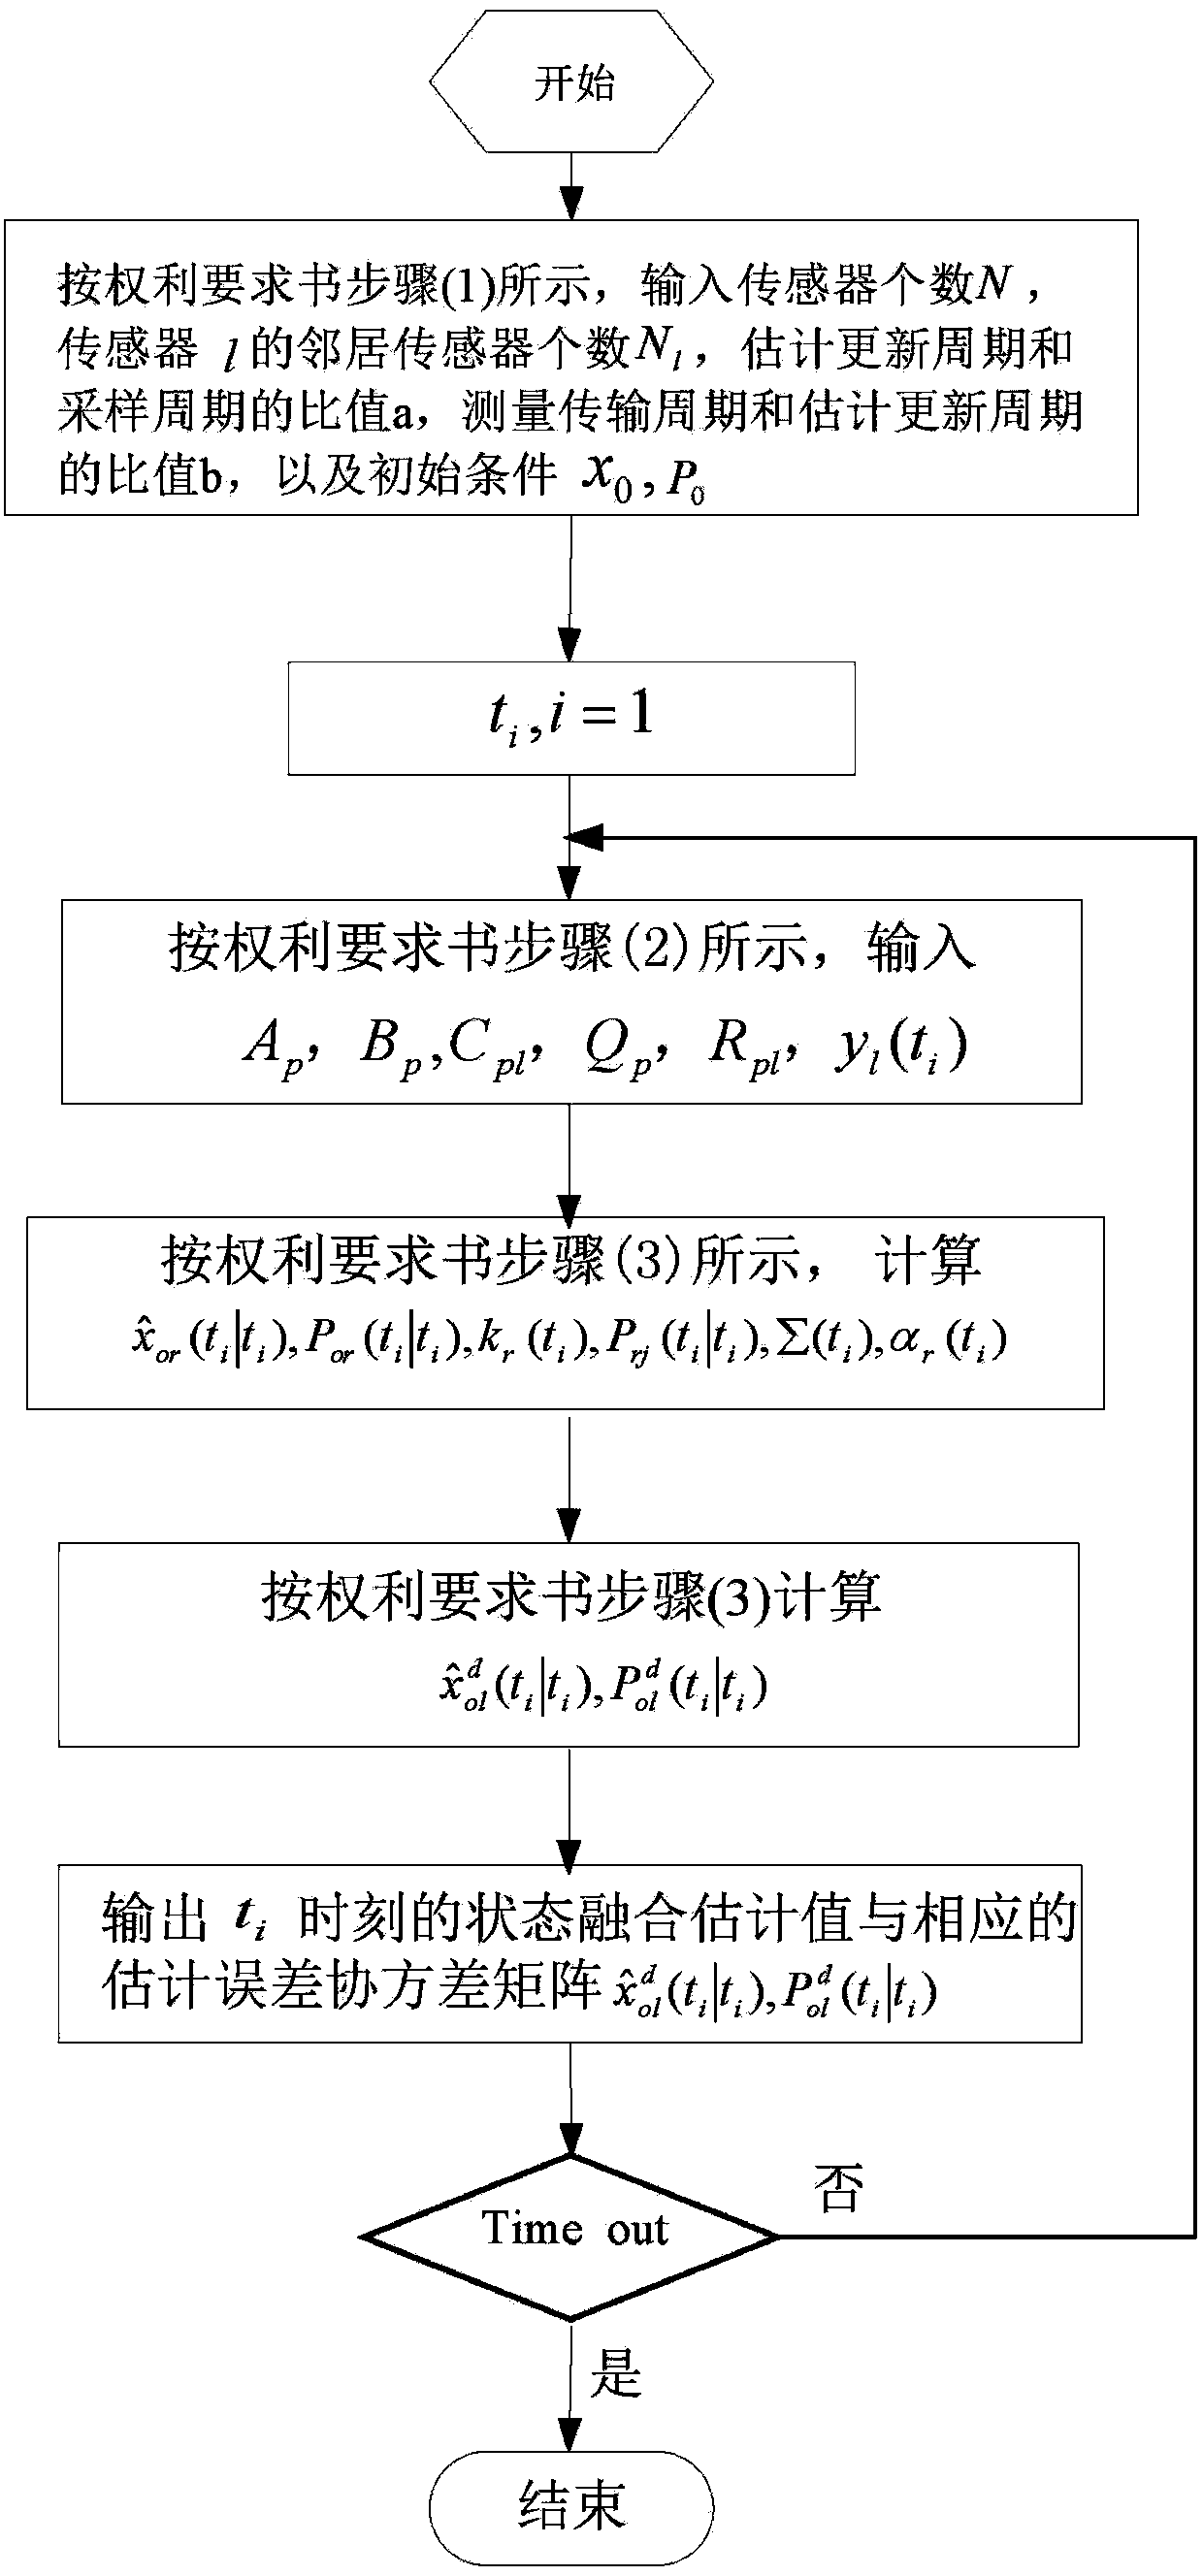 State estimation and data fusion method for multi-rate observation data